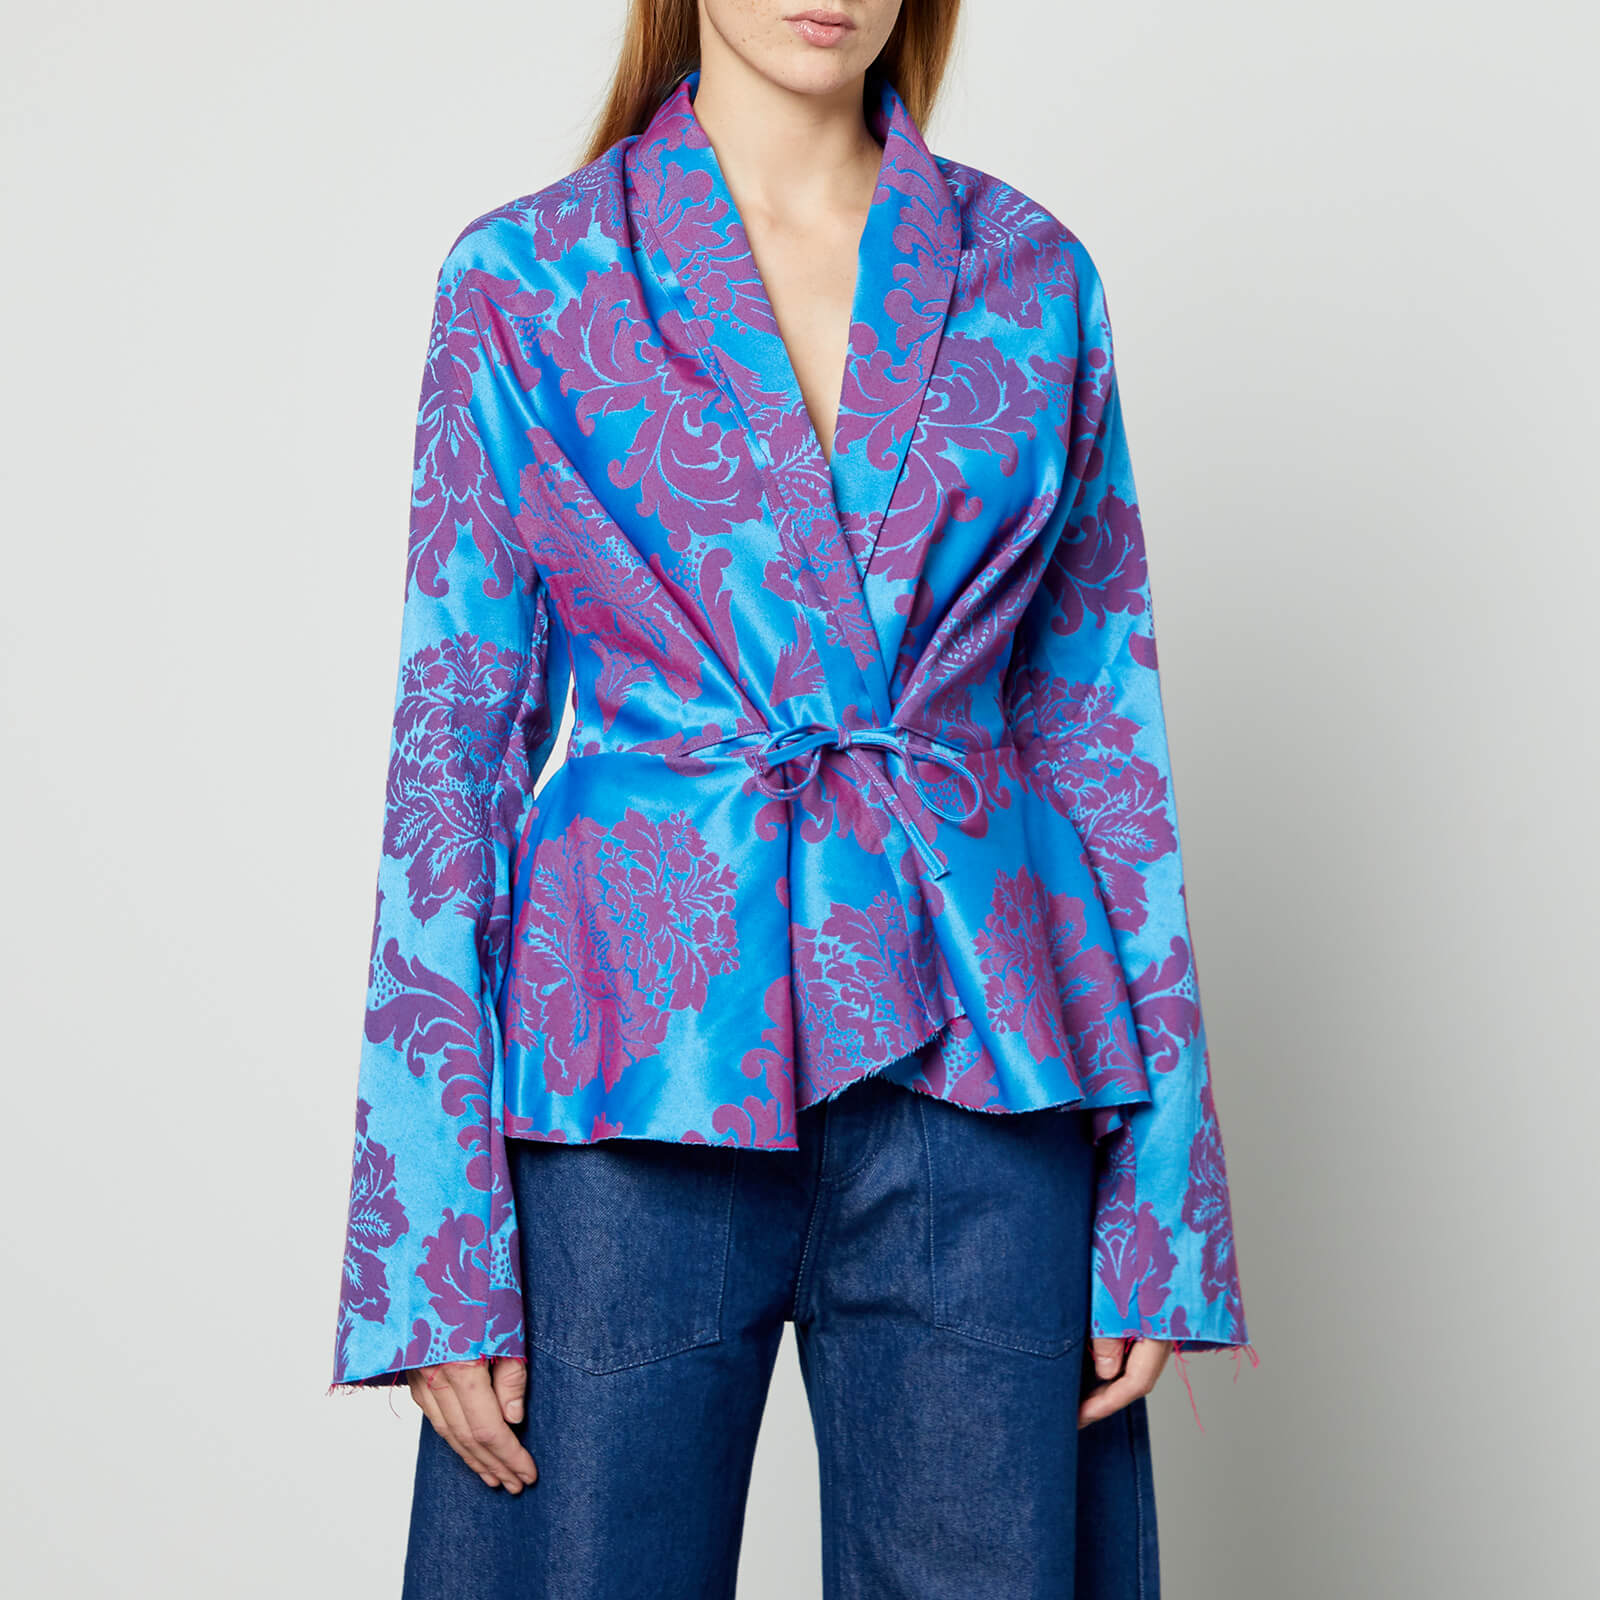 Marques Almeida Draped Fitted Brocade Jacket - UK 6